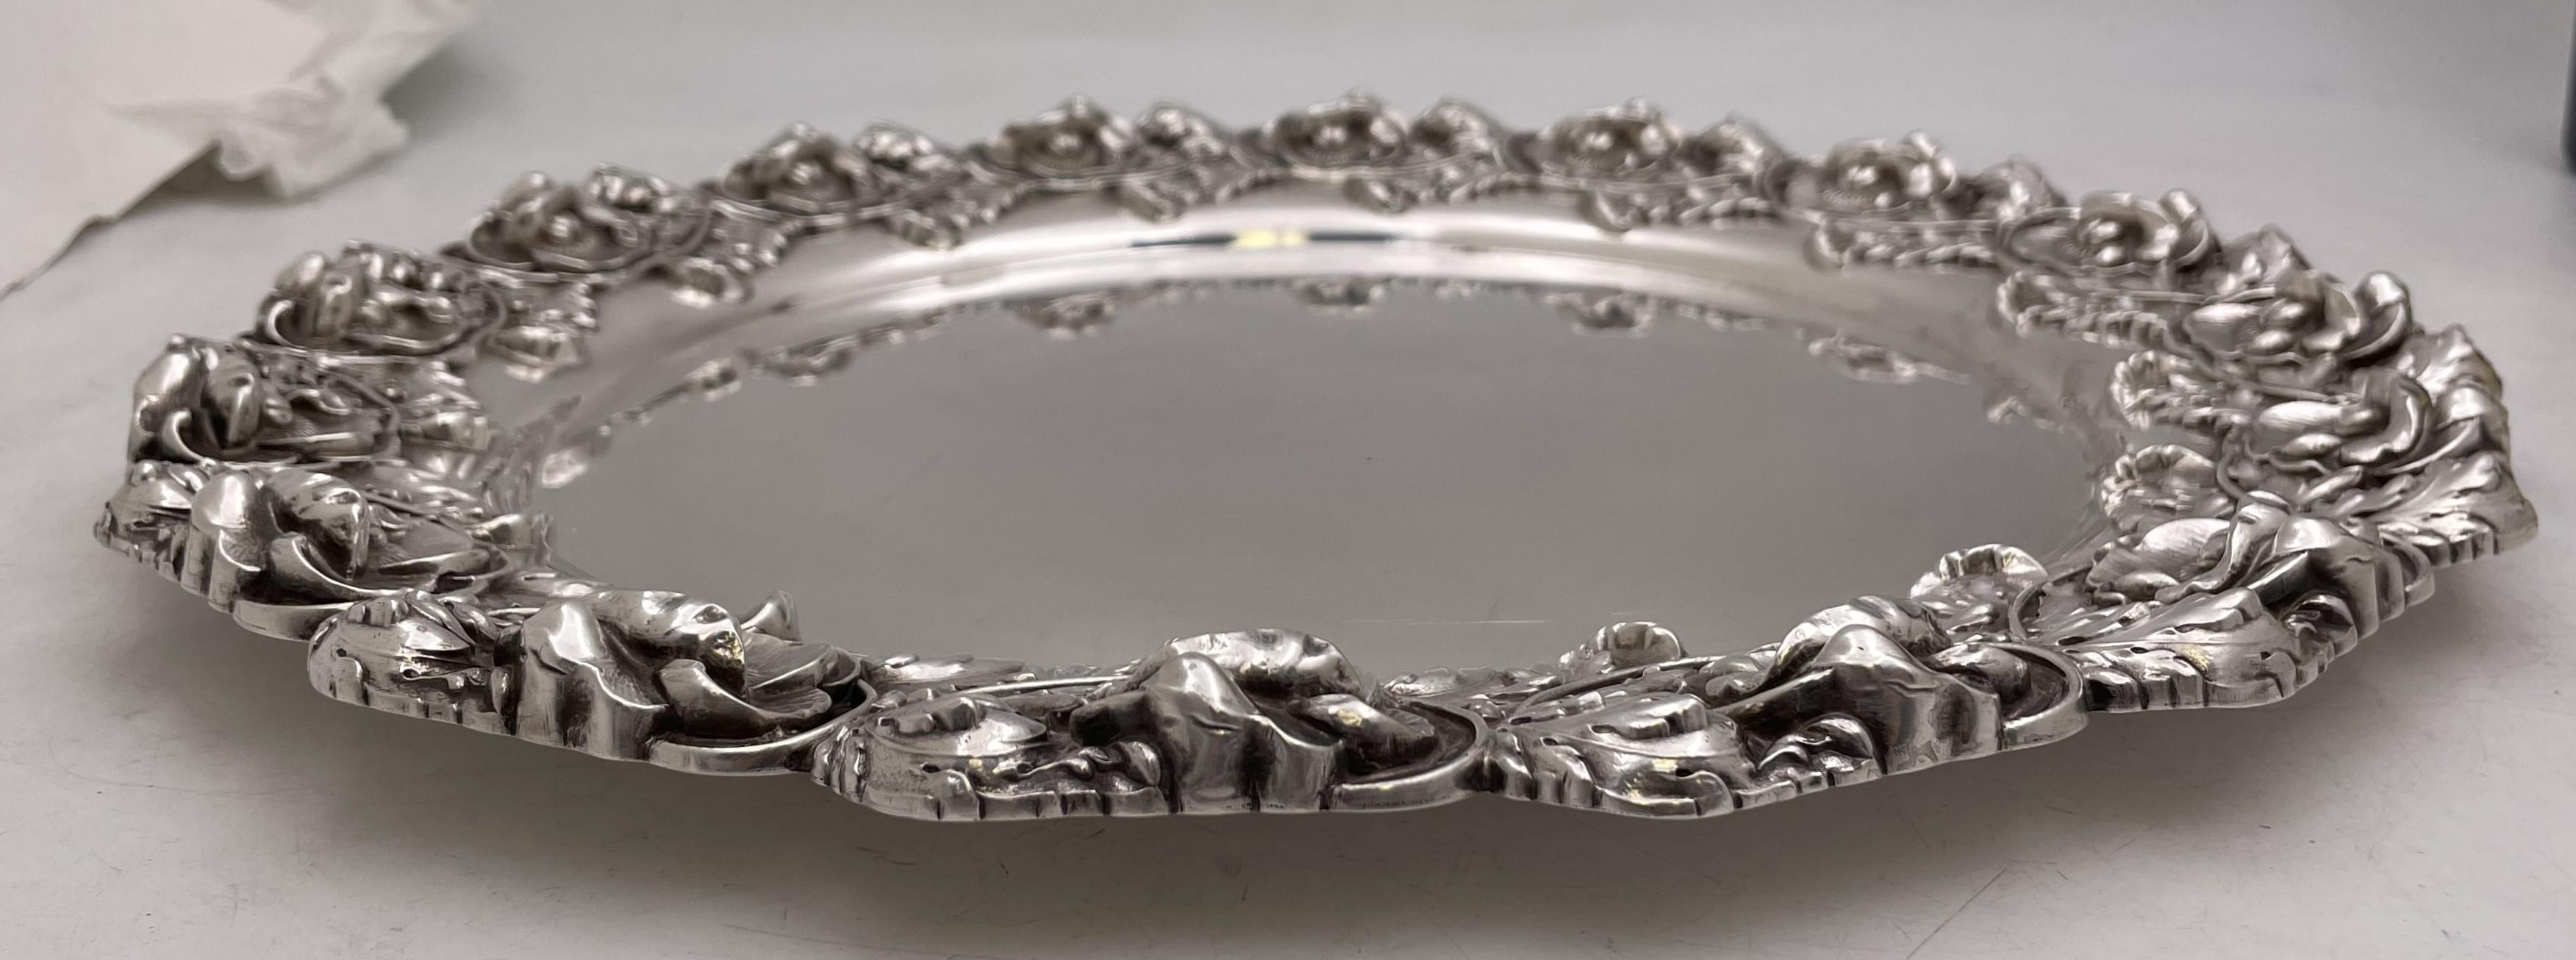 Whiting Round Sterling Silver Tray / Platter in Art Nouveau Style In Good Condition For Sale In New York, NY